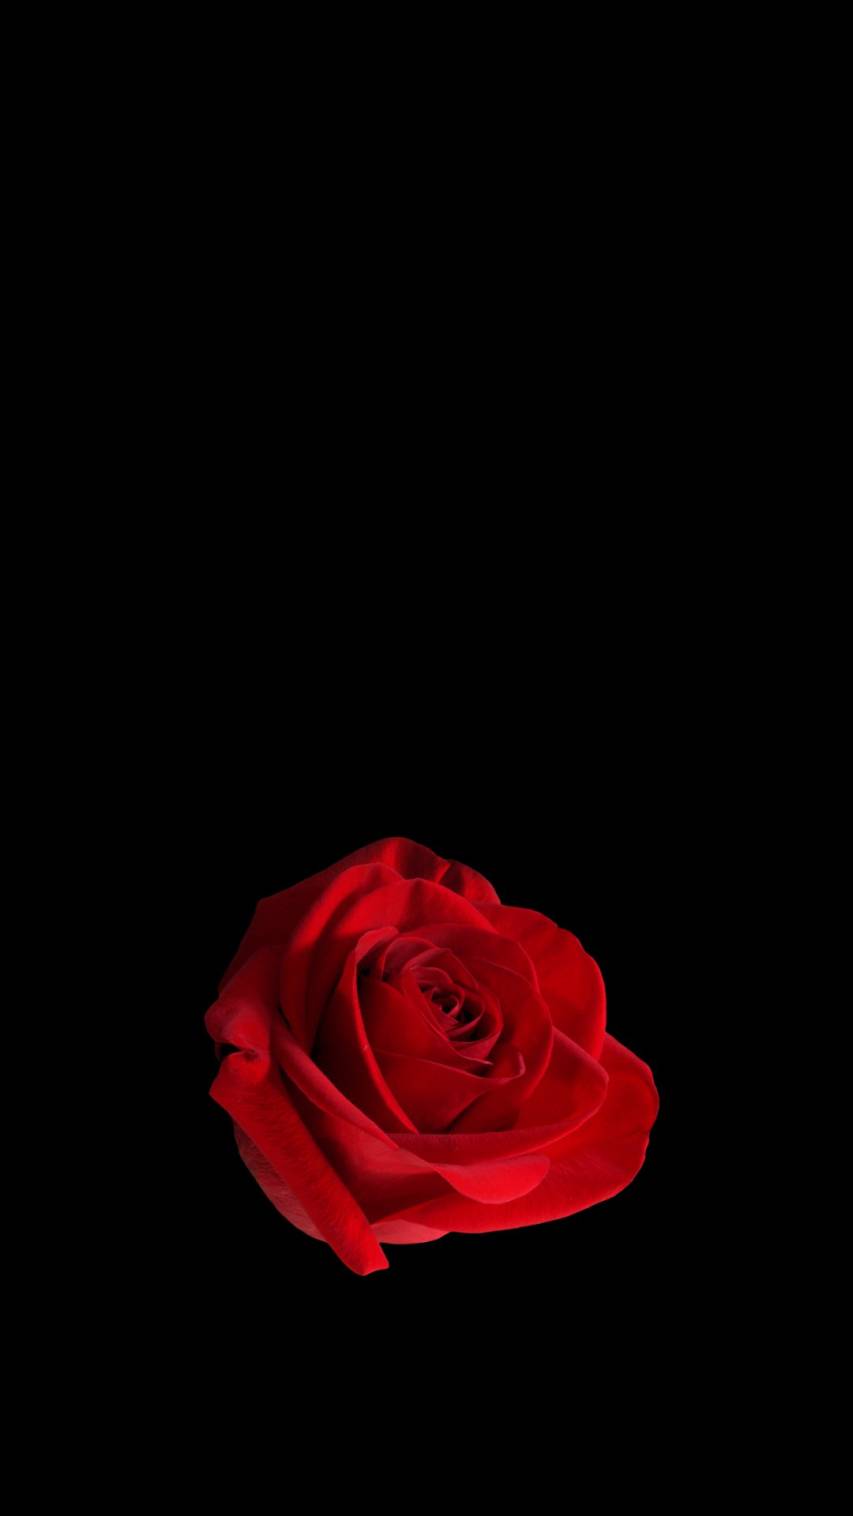 Red and Black Rose iPhone Backgrounds